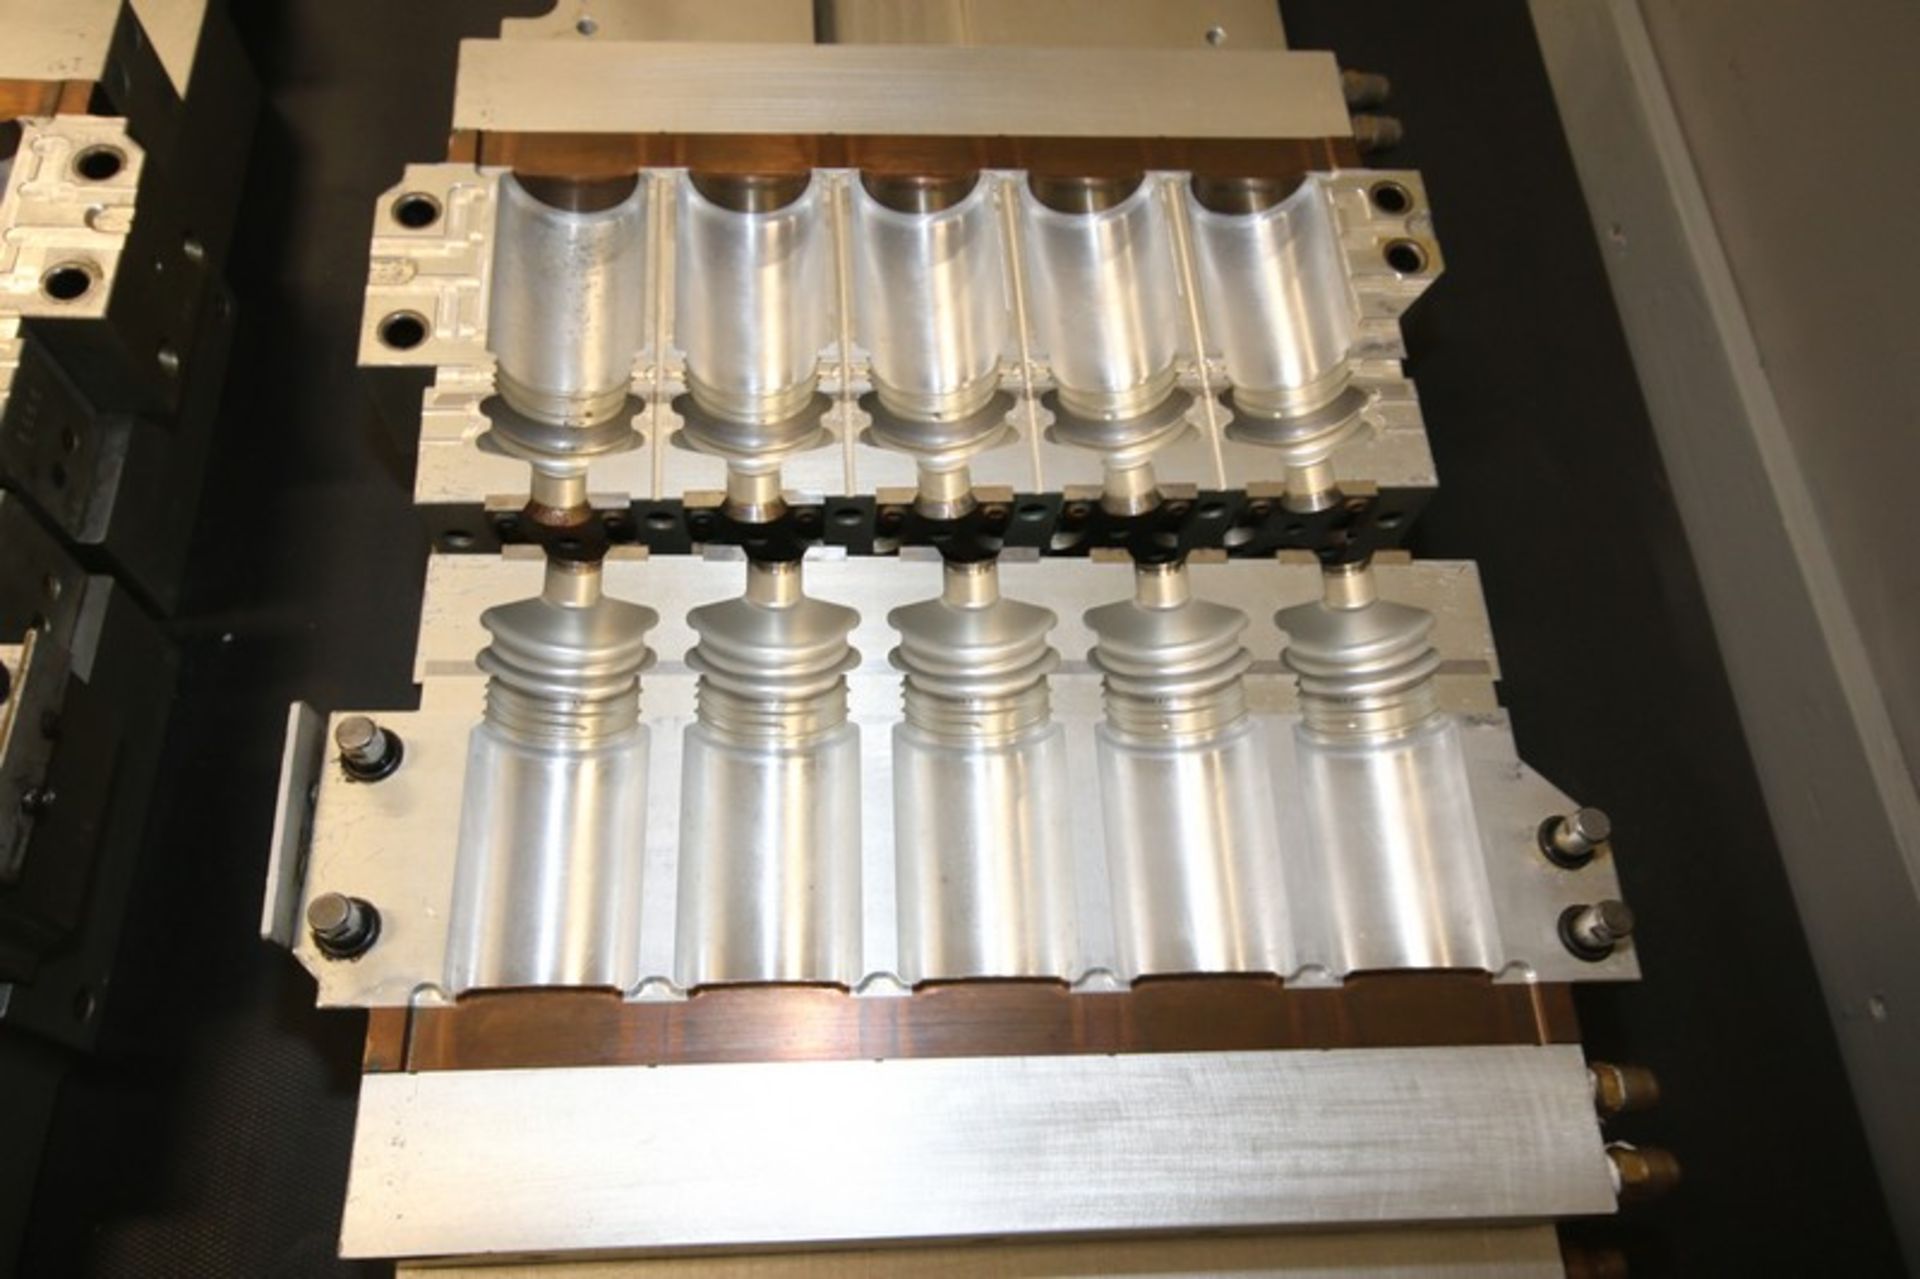 Compact 5-Wide S/S Bottle Molds, S/N 905.851.7724/859.371.3250, Overall Dims.: Aprox. 18-1/4" L x - Image 6 of 9